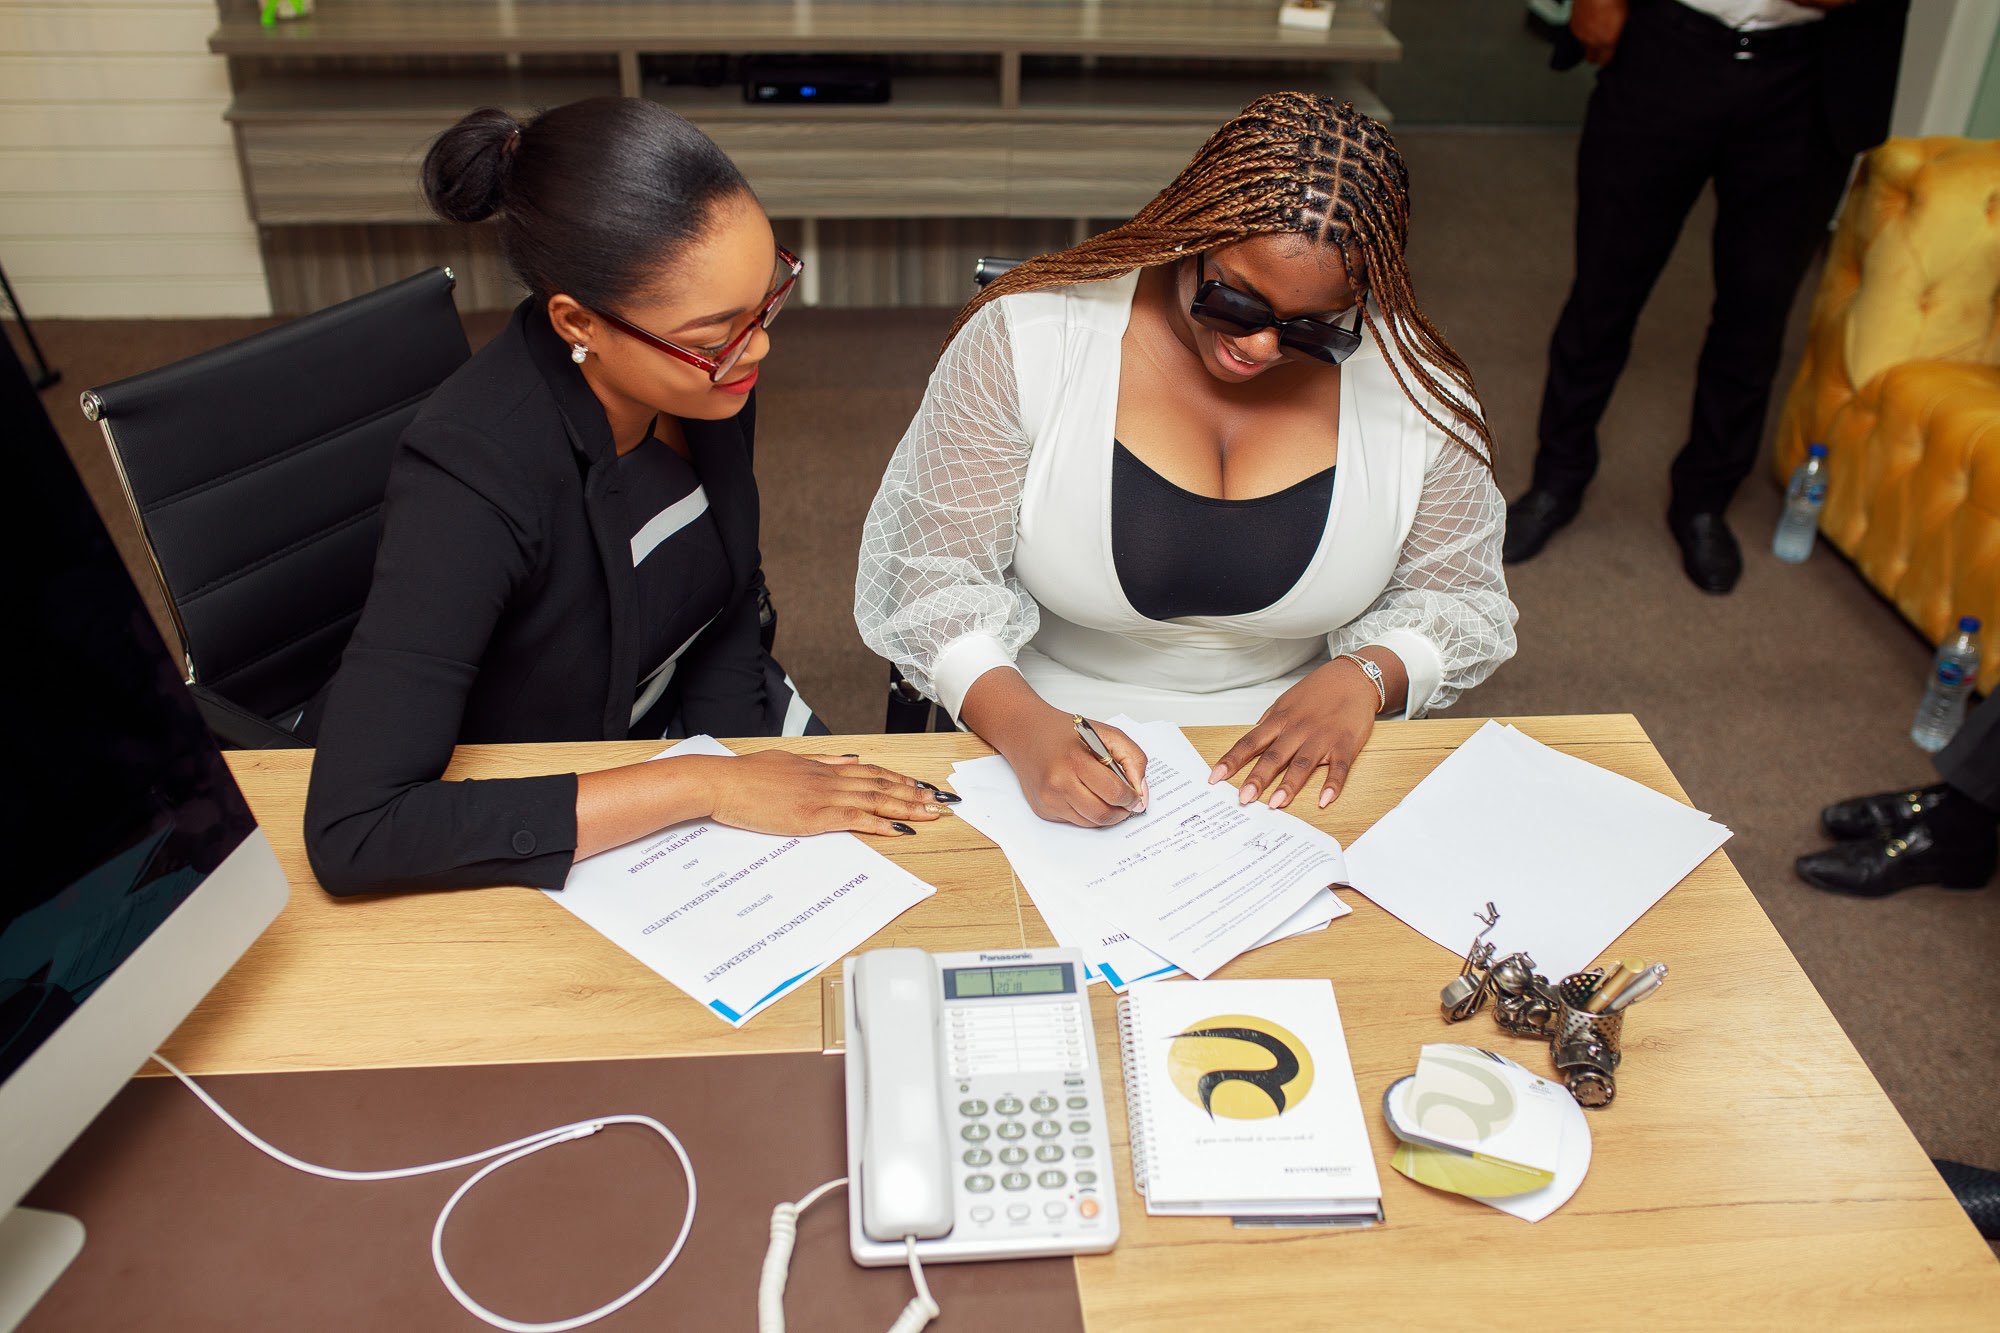 Dorathy Signs New Deal With Printing and Branding Company [Photo]